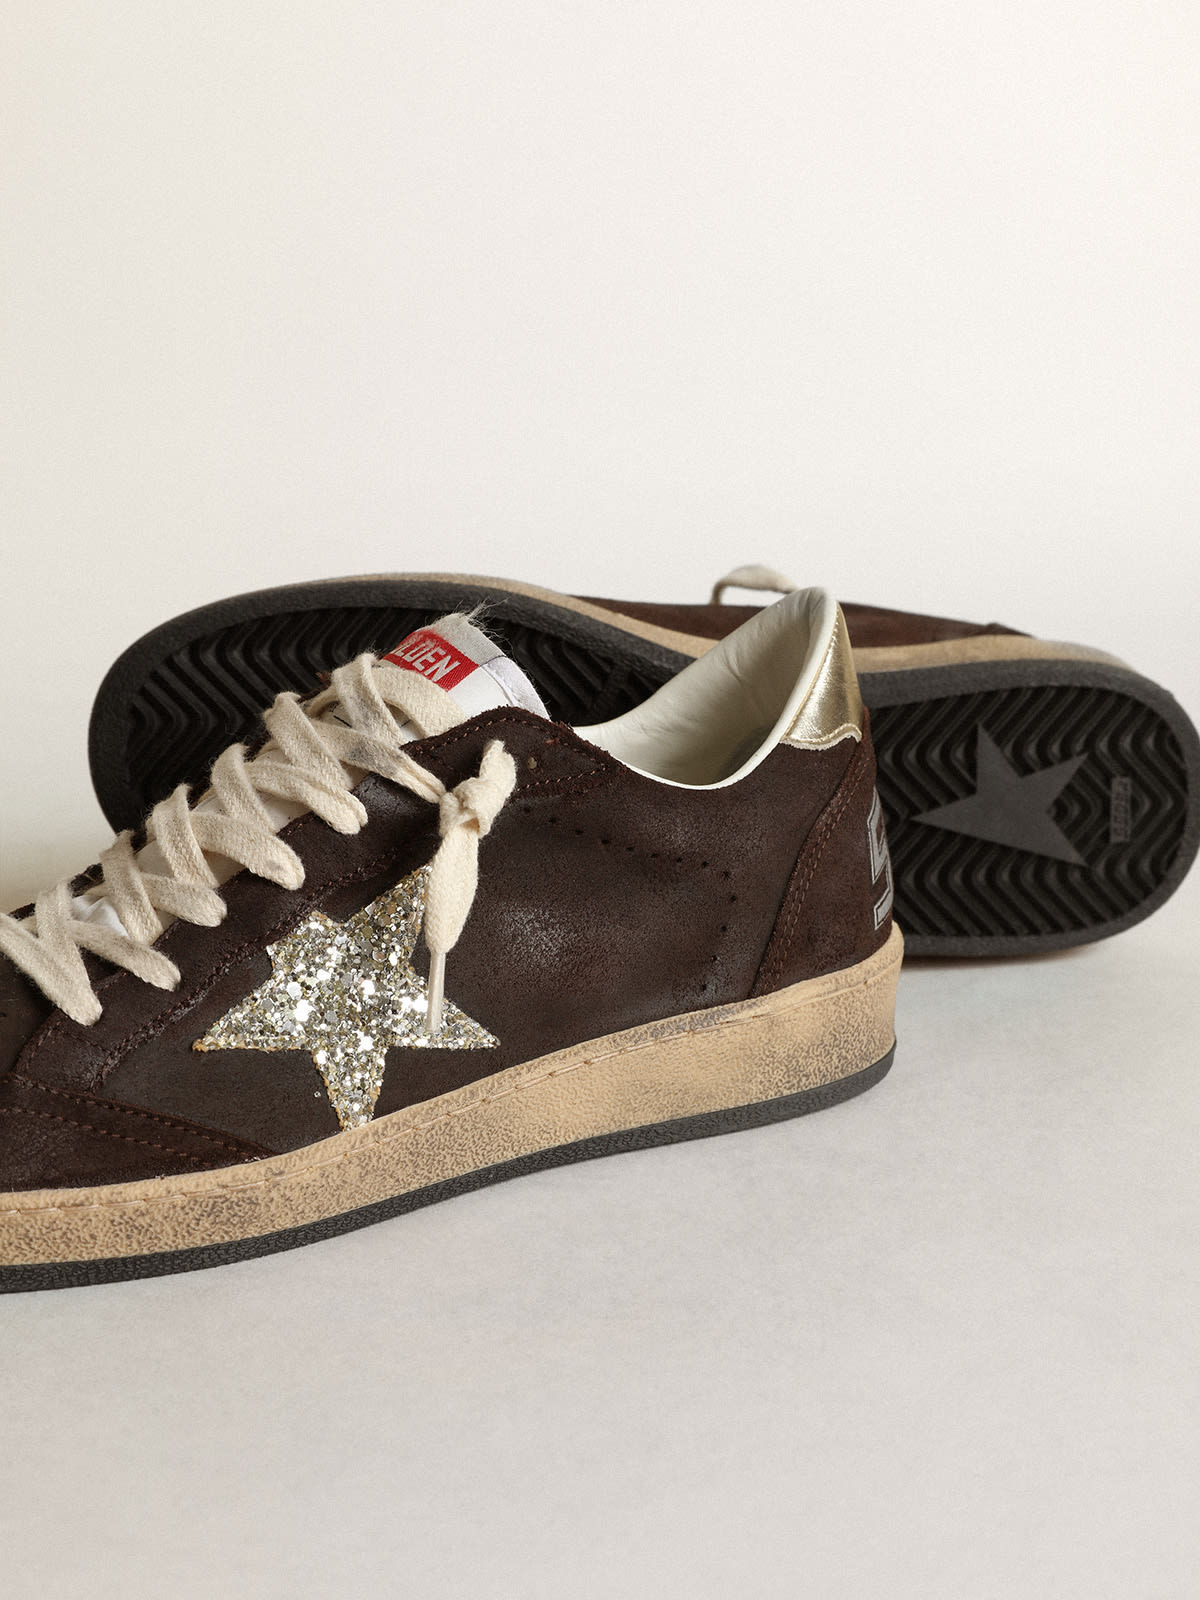 Golden Goose - Ball Star sneakers in brown suede with platinum glitter star and white nylon tongue in 